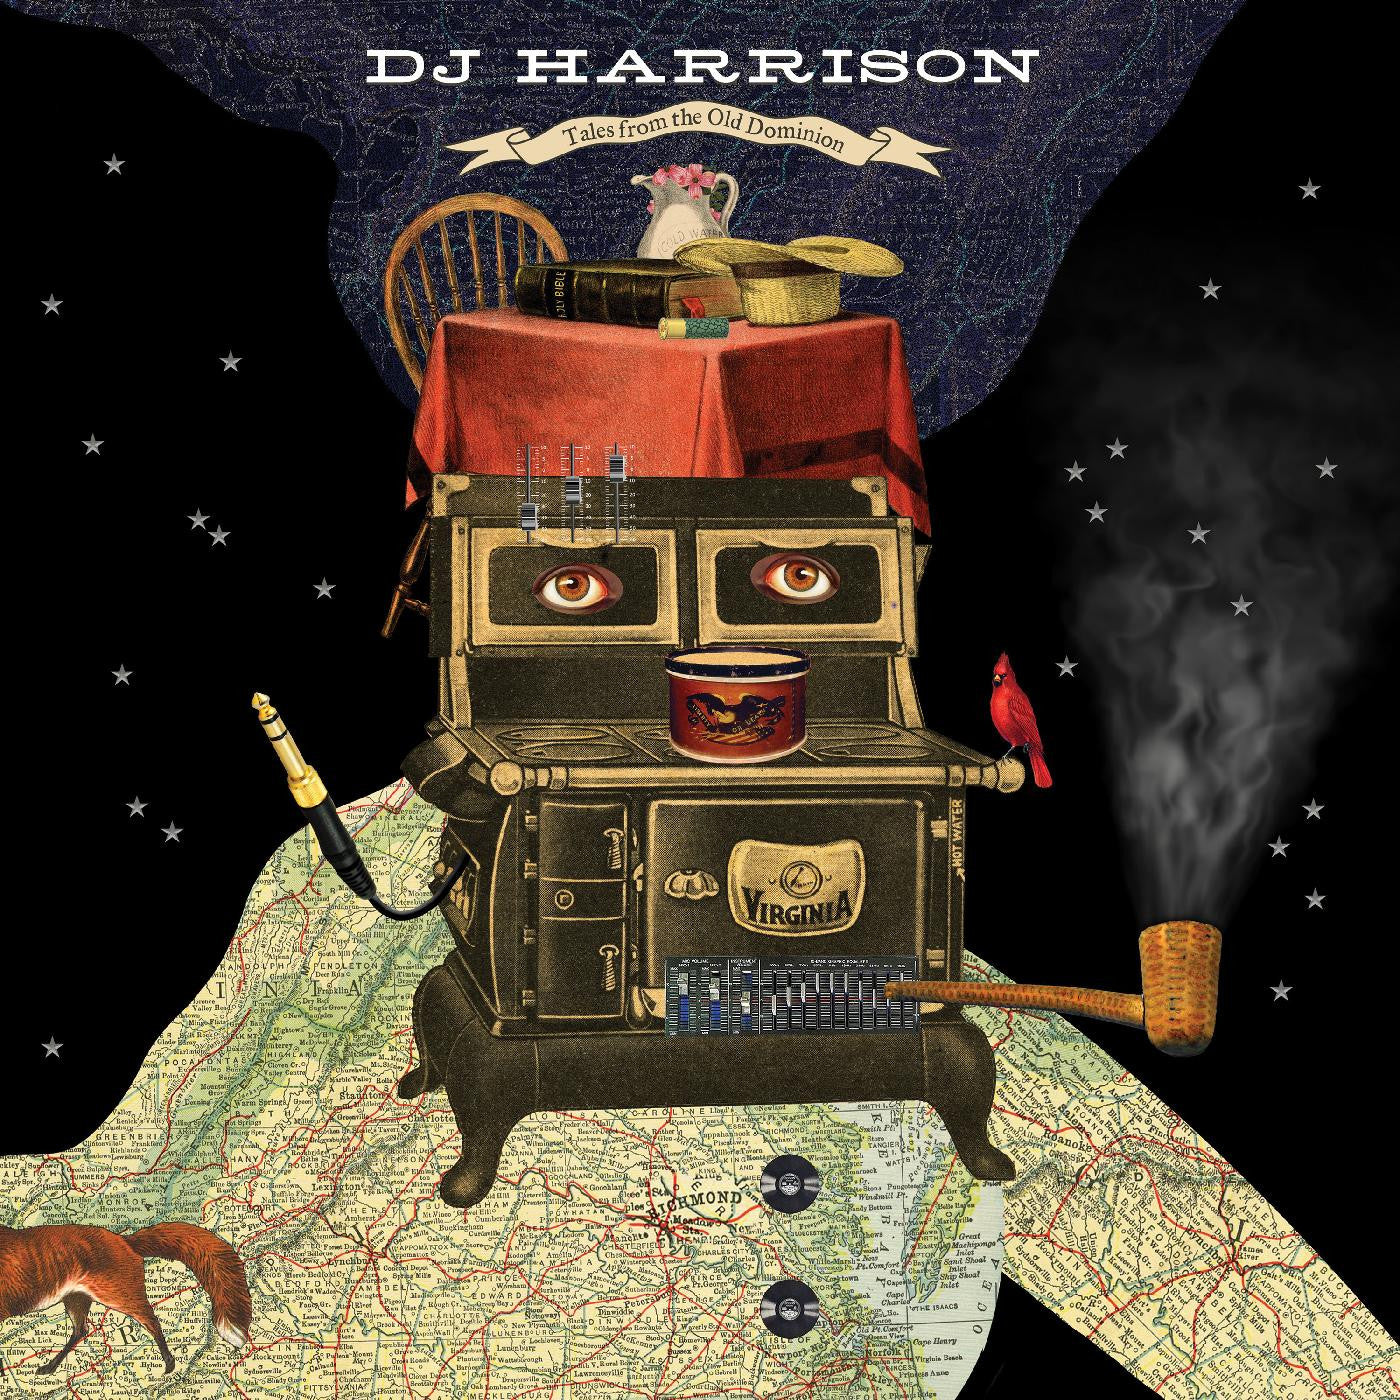 [DAMAGED] DJ Harrison - Tales from the Old Dominion